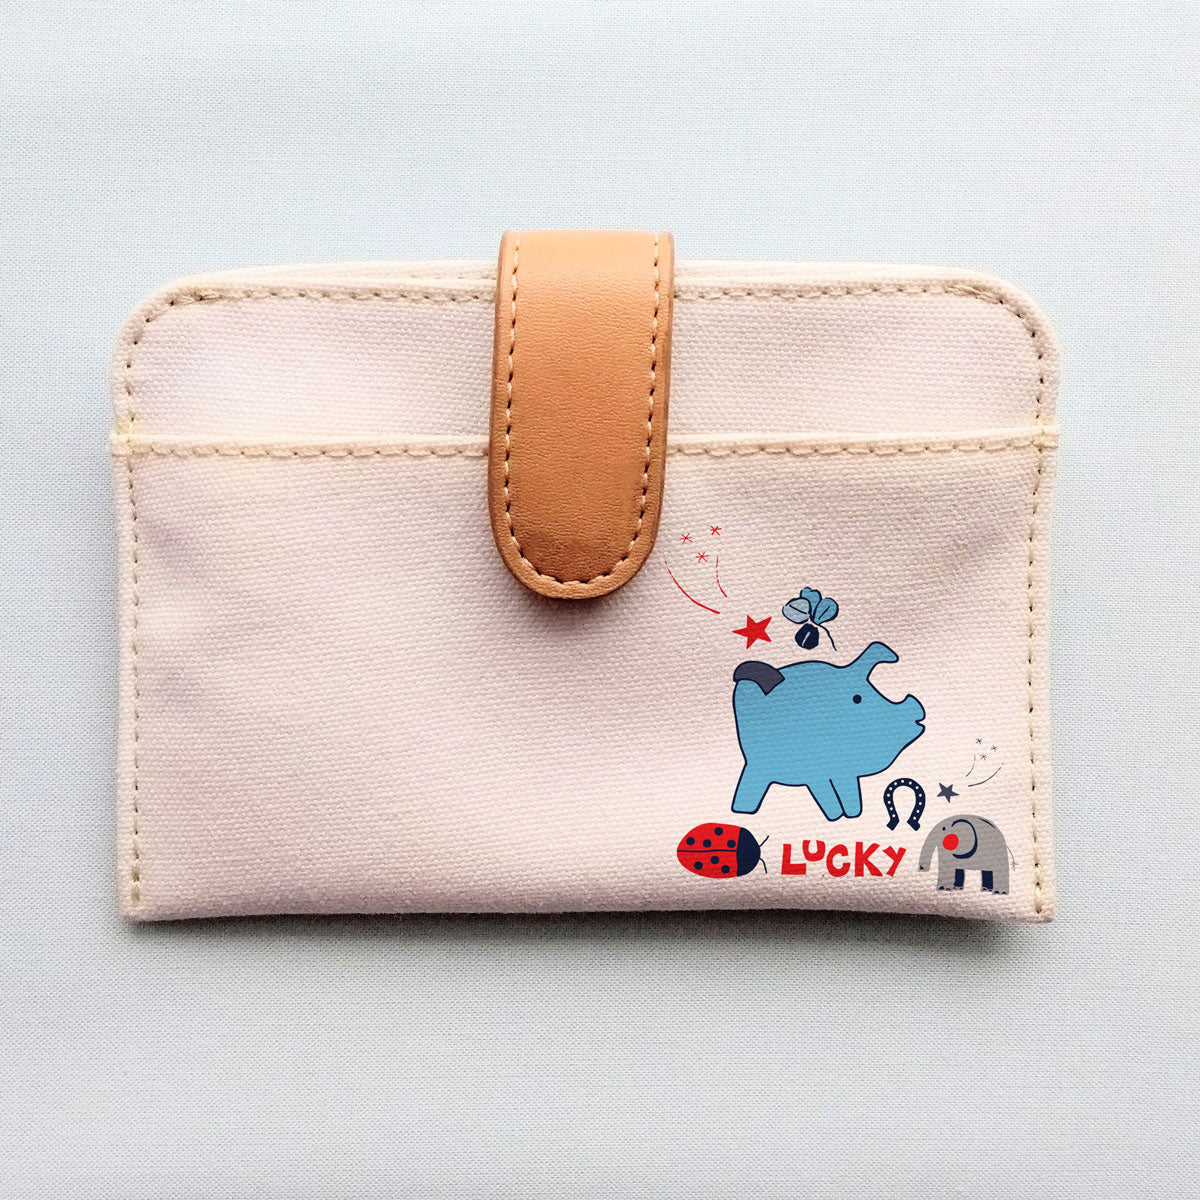 Five Patch Design lucky pouch